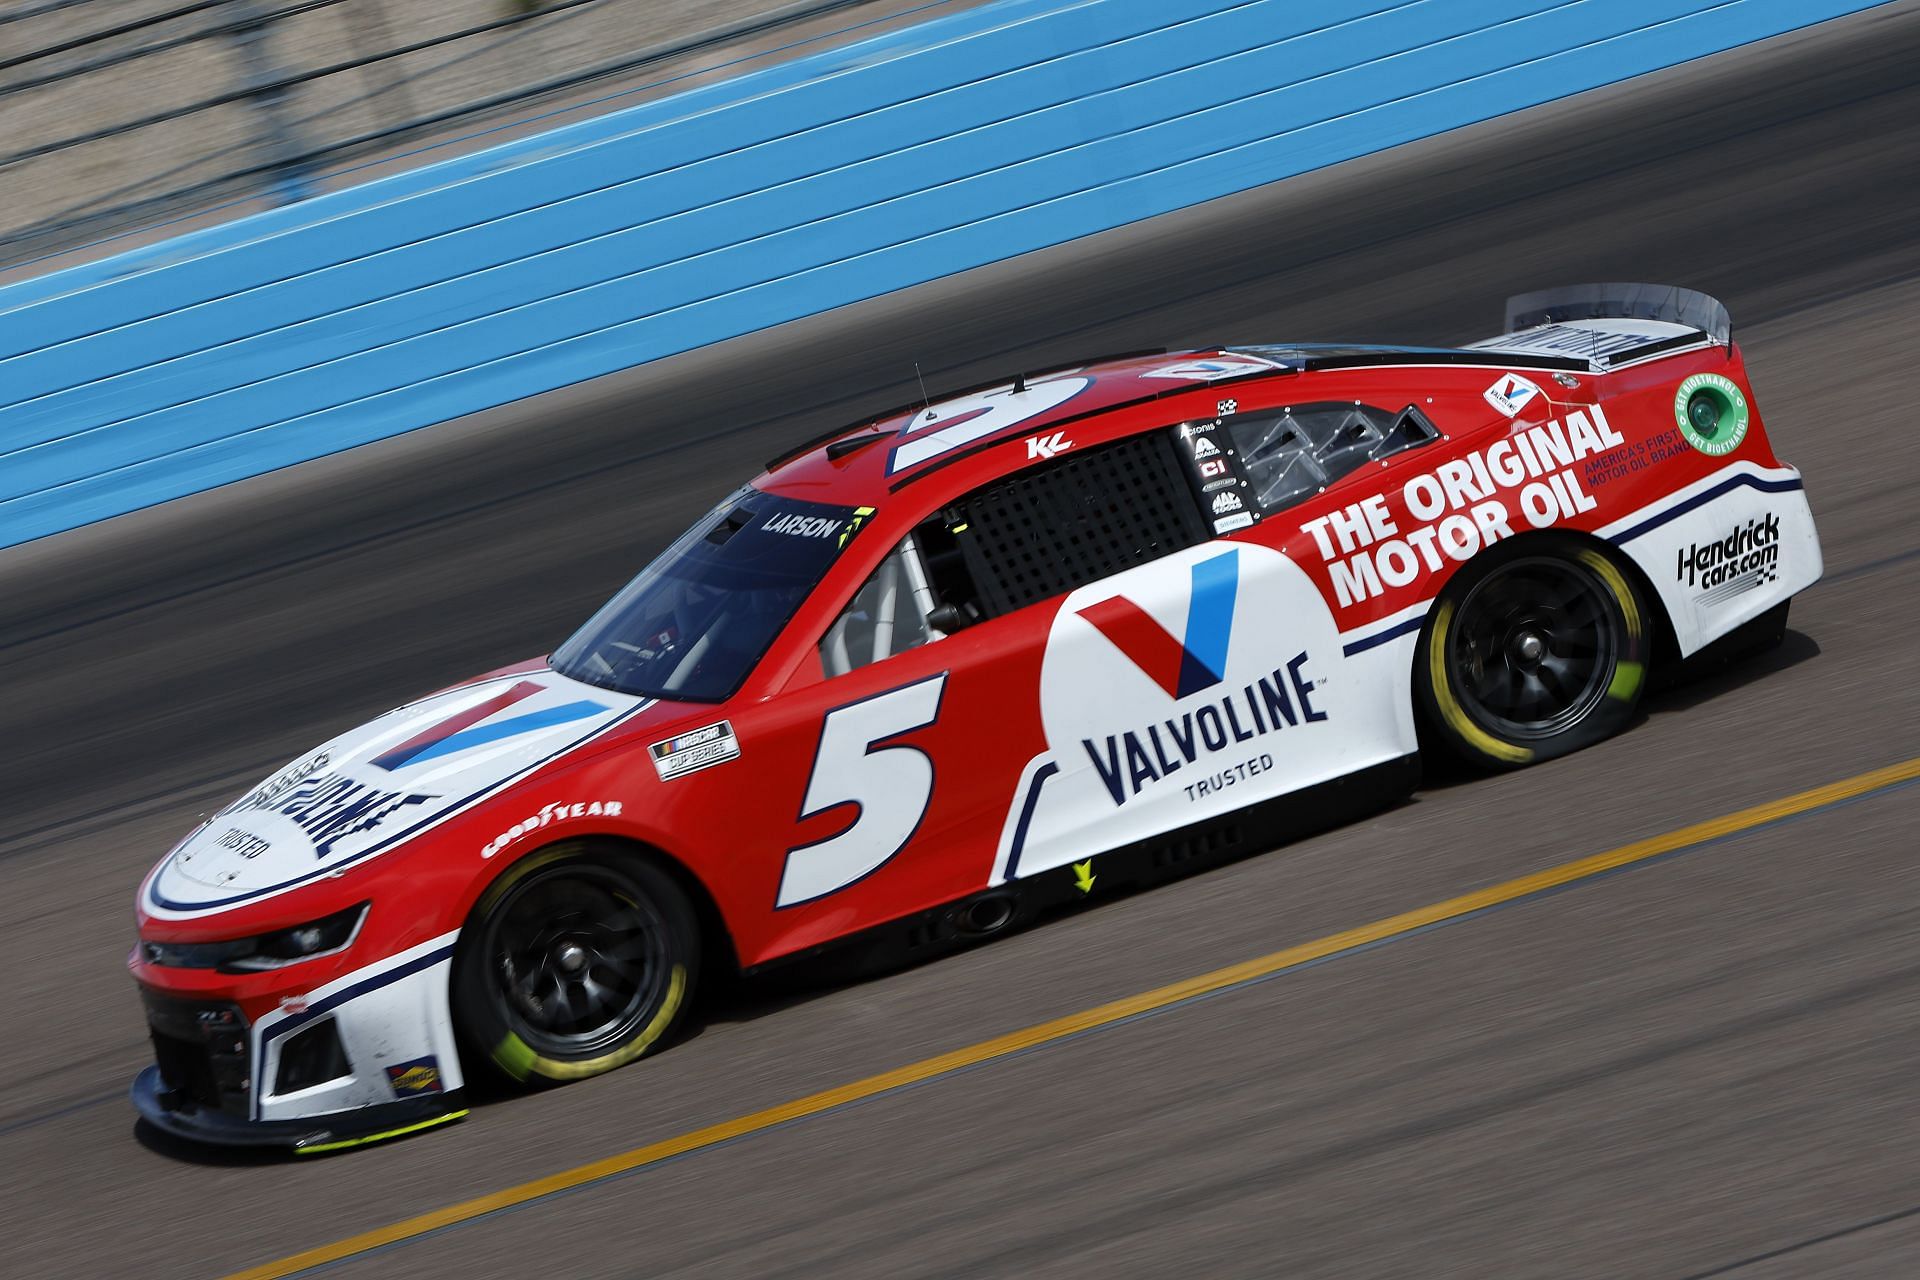 Kyle Larson flaunts a special livery on the No. 5 Valvoline Chevrolet while racing at Phoenix Raceway. (Photo by Sean Gardner/Getty Images)